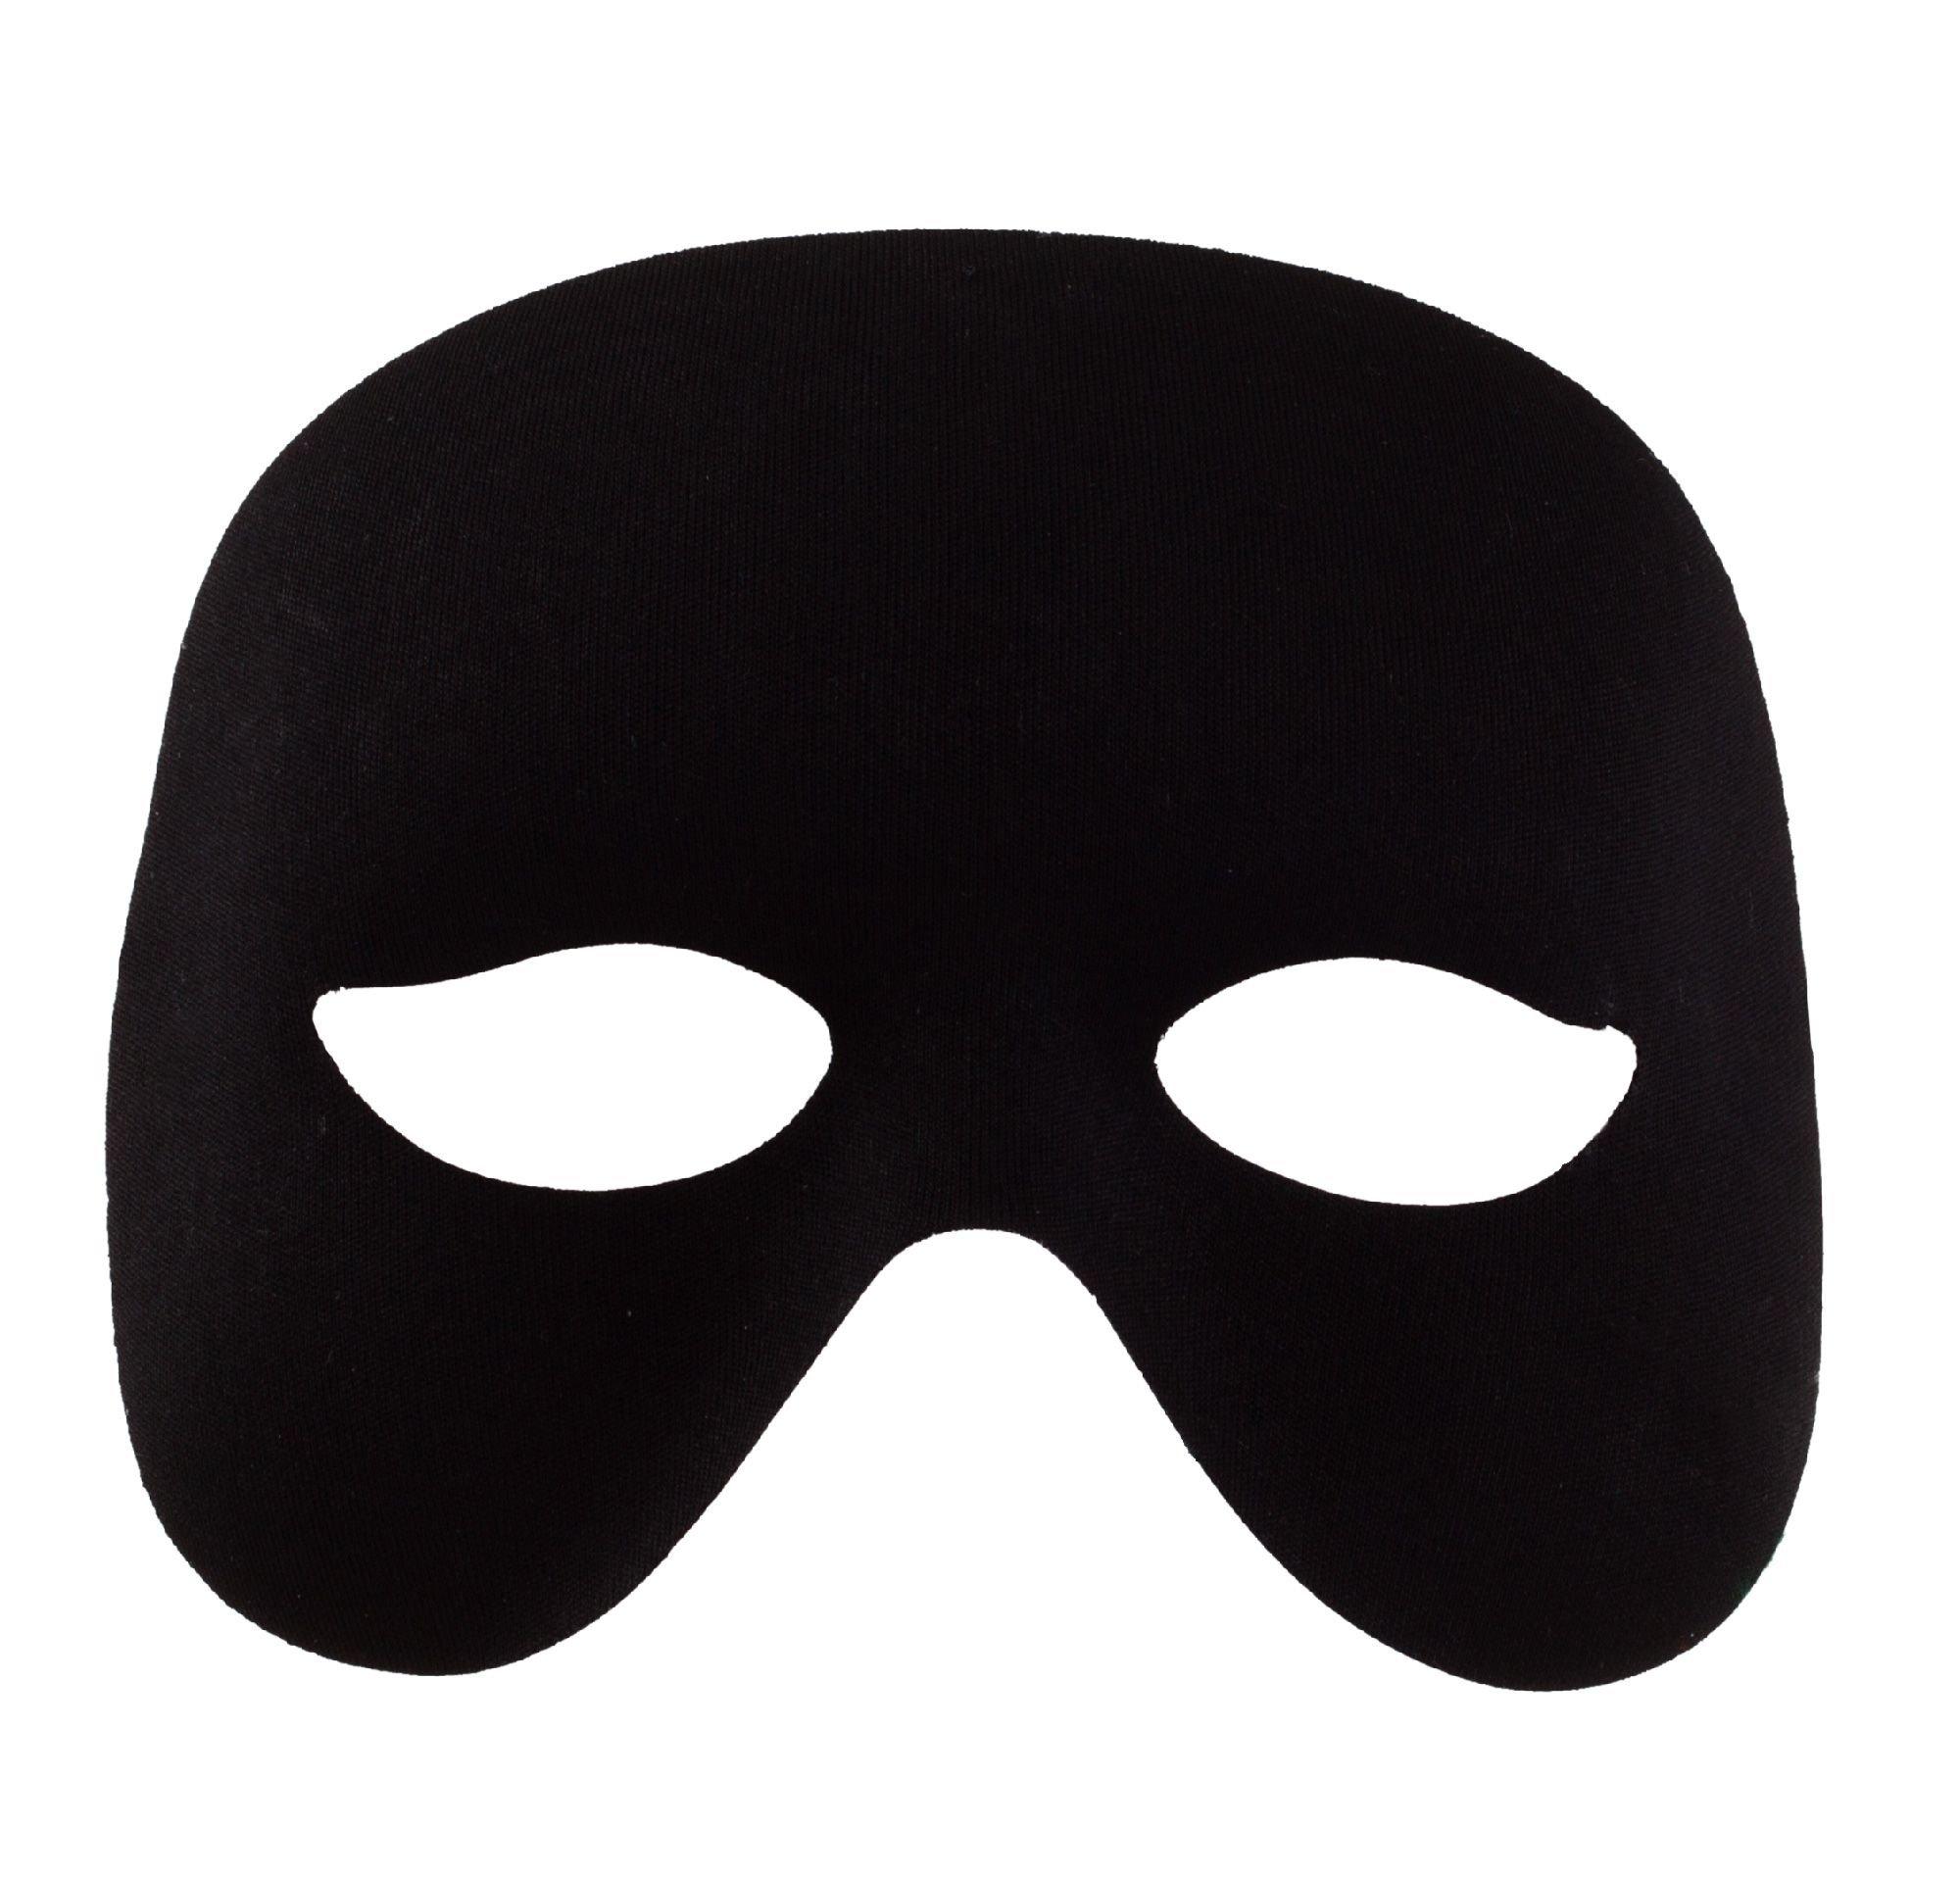 Black Domino Cocktail Mask 5 3/4in x 4 1/4in | Party City